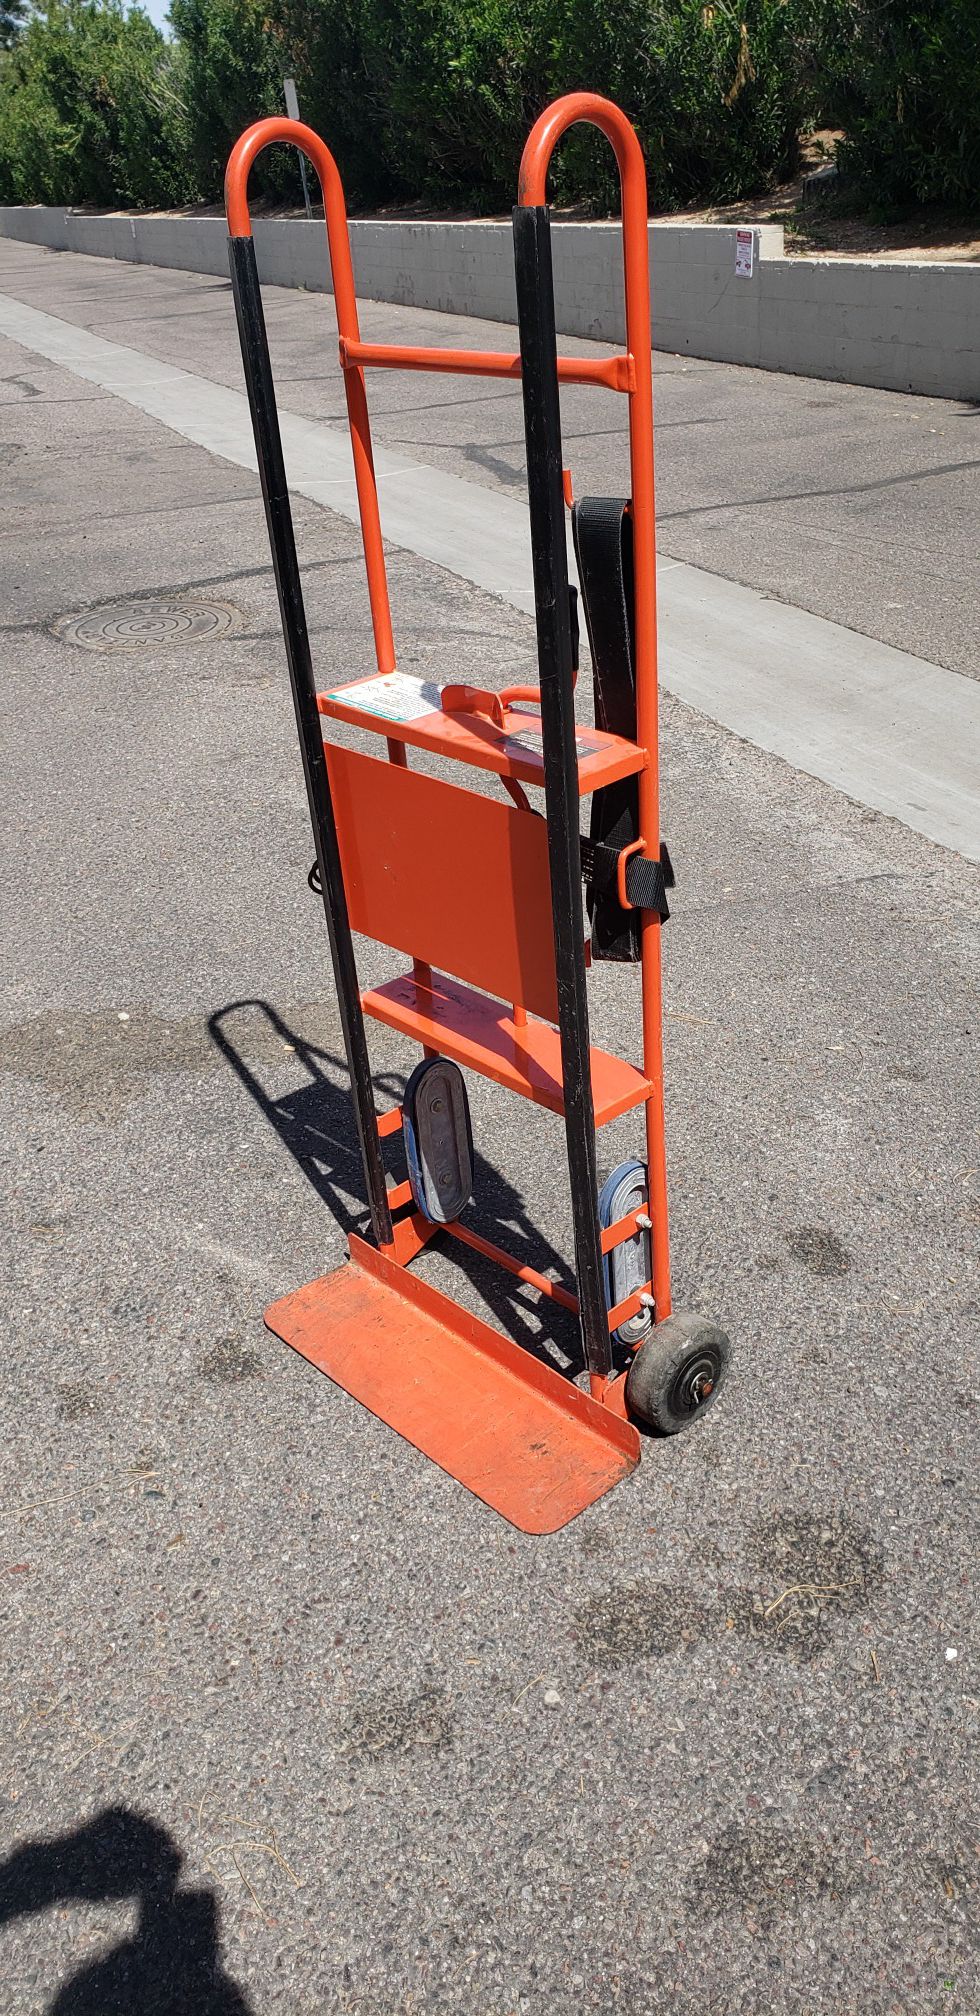 2 Wheel Appliance Dolly Hand Truck 700lb Capacity with E-Z Lock Handle $75 each (8 available) Or Take ALL 8 for $400